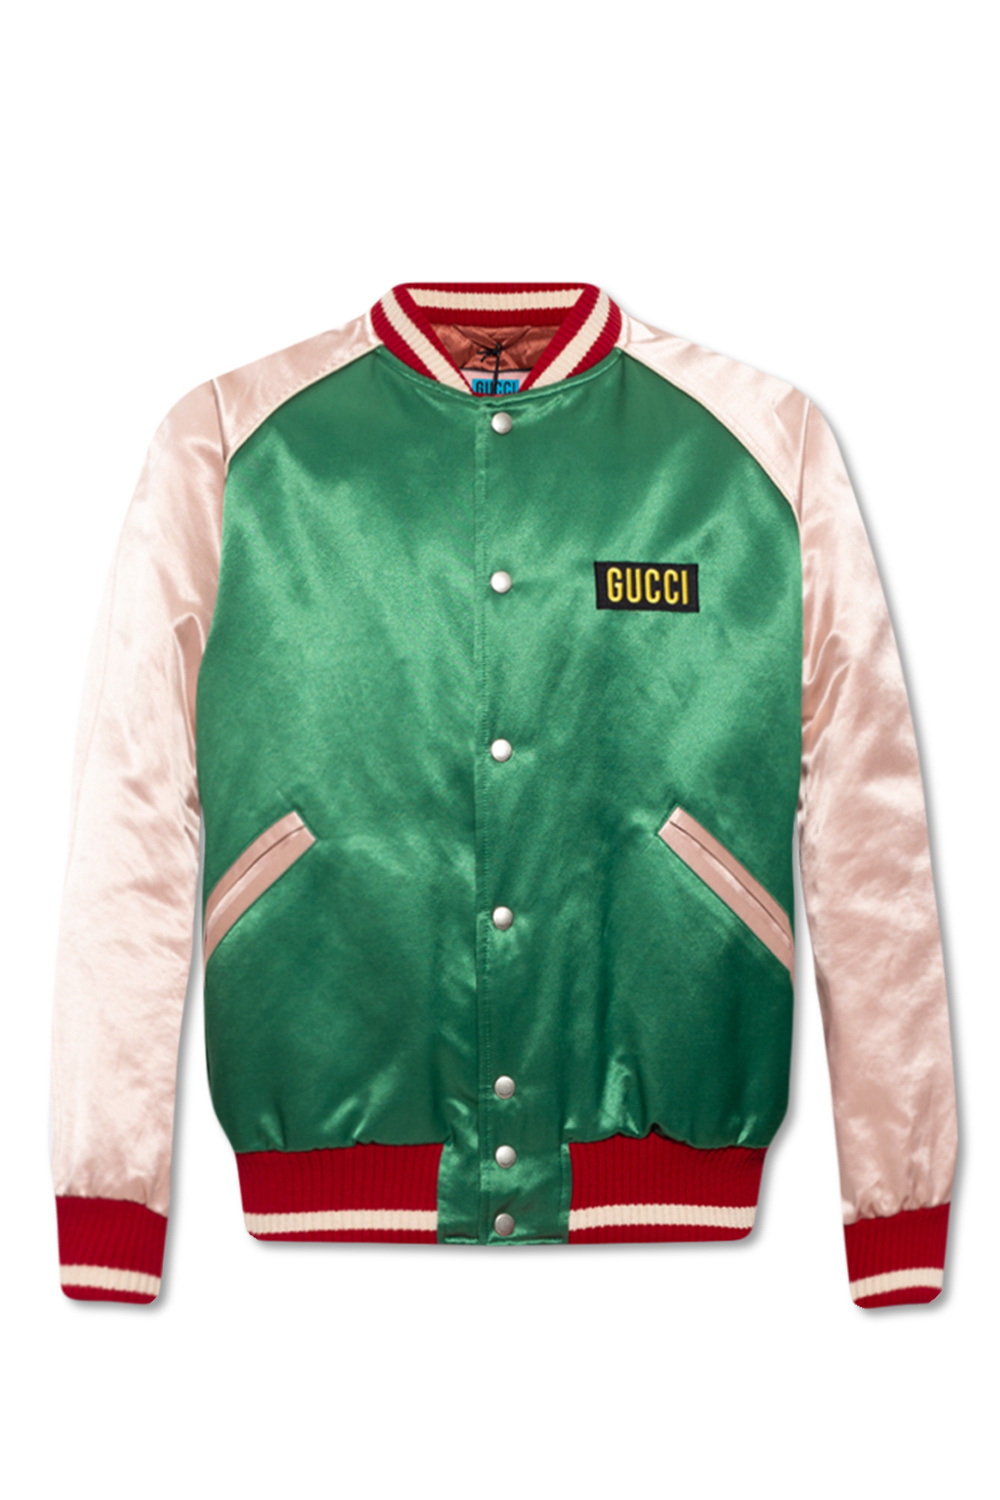 IetpShops Morocco - o Dive - The Pineapple' collection bomber jacket Gucci